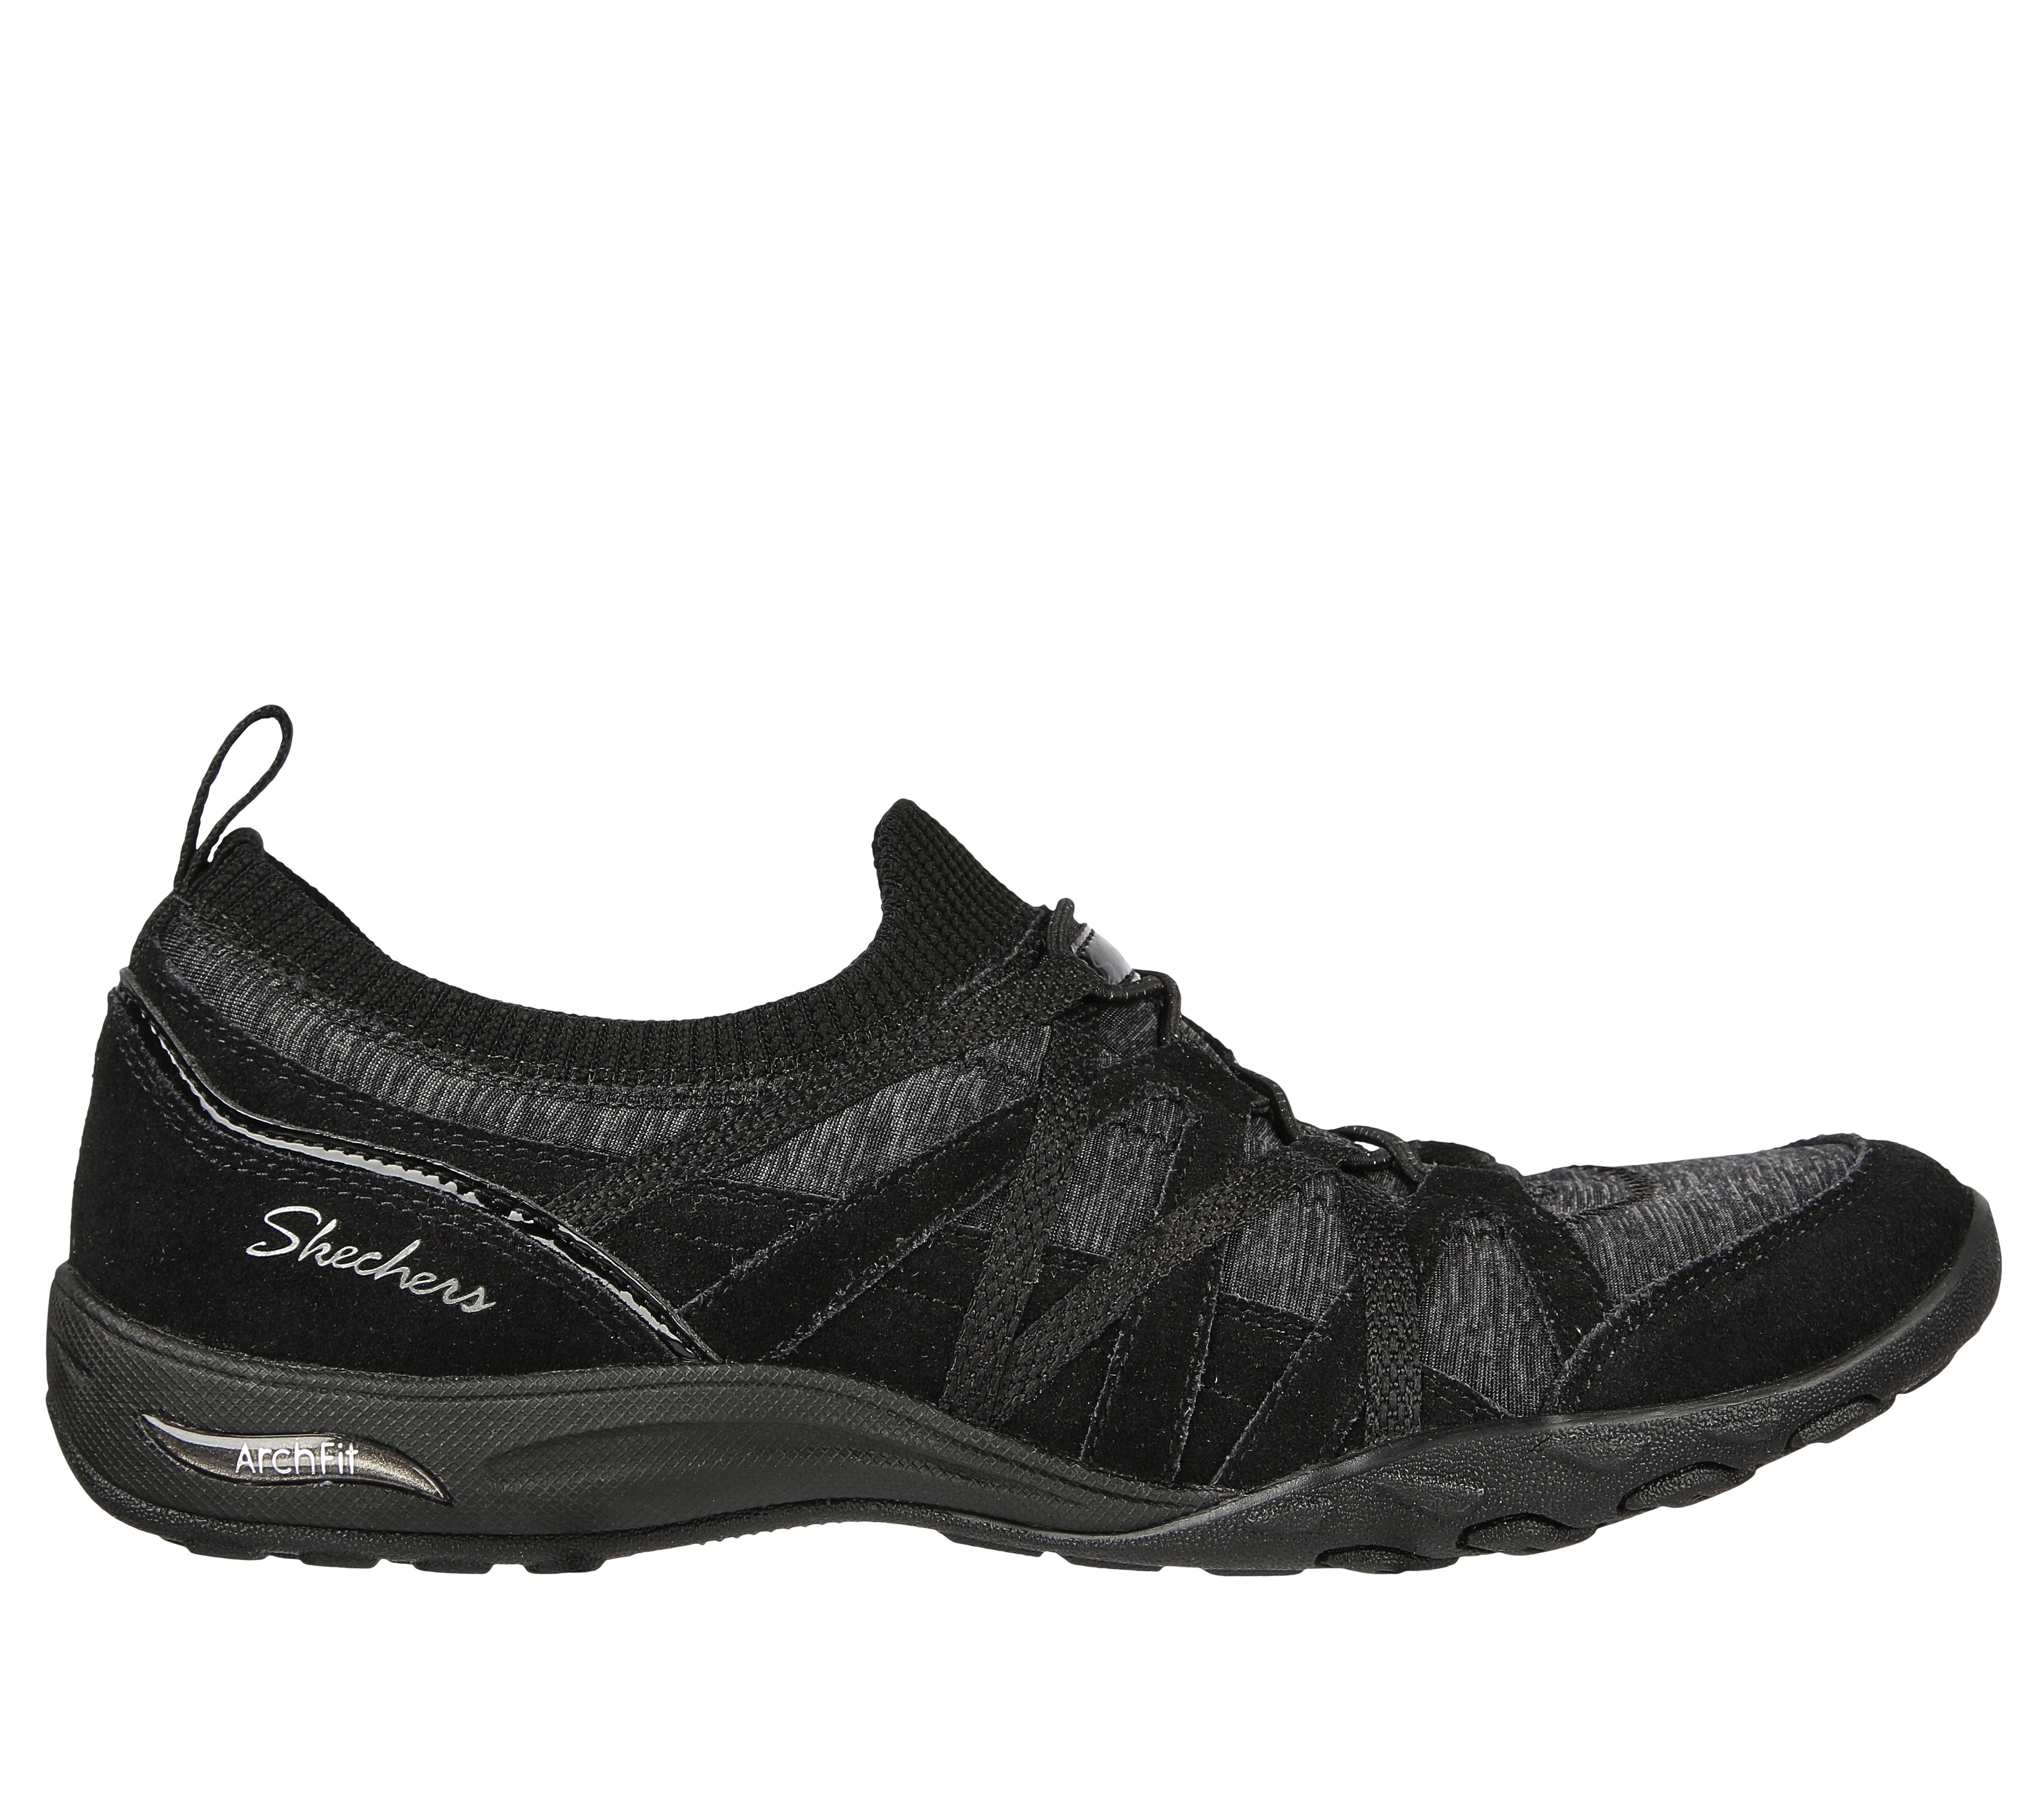 Skechers Arch Fit Comfy - Bold Statement | SKECHERS